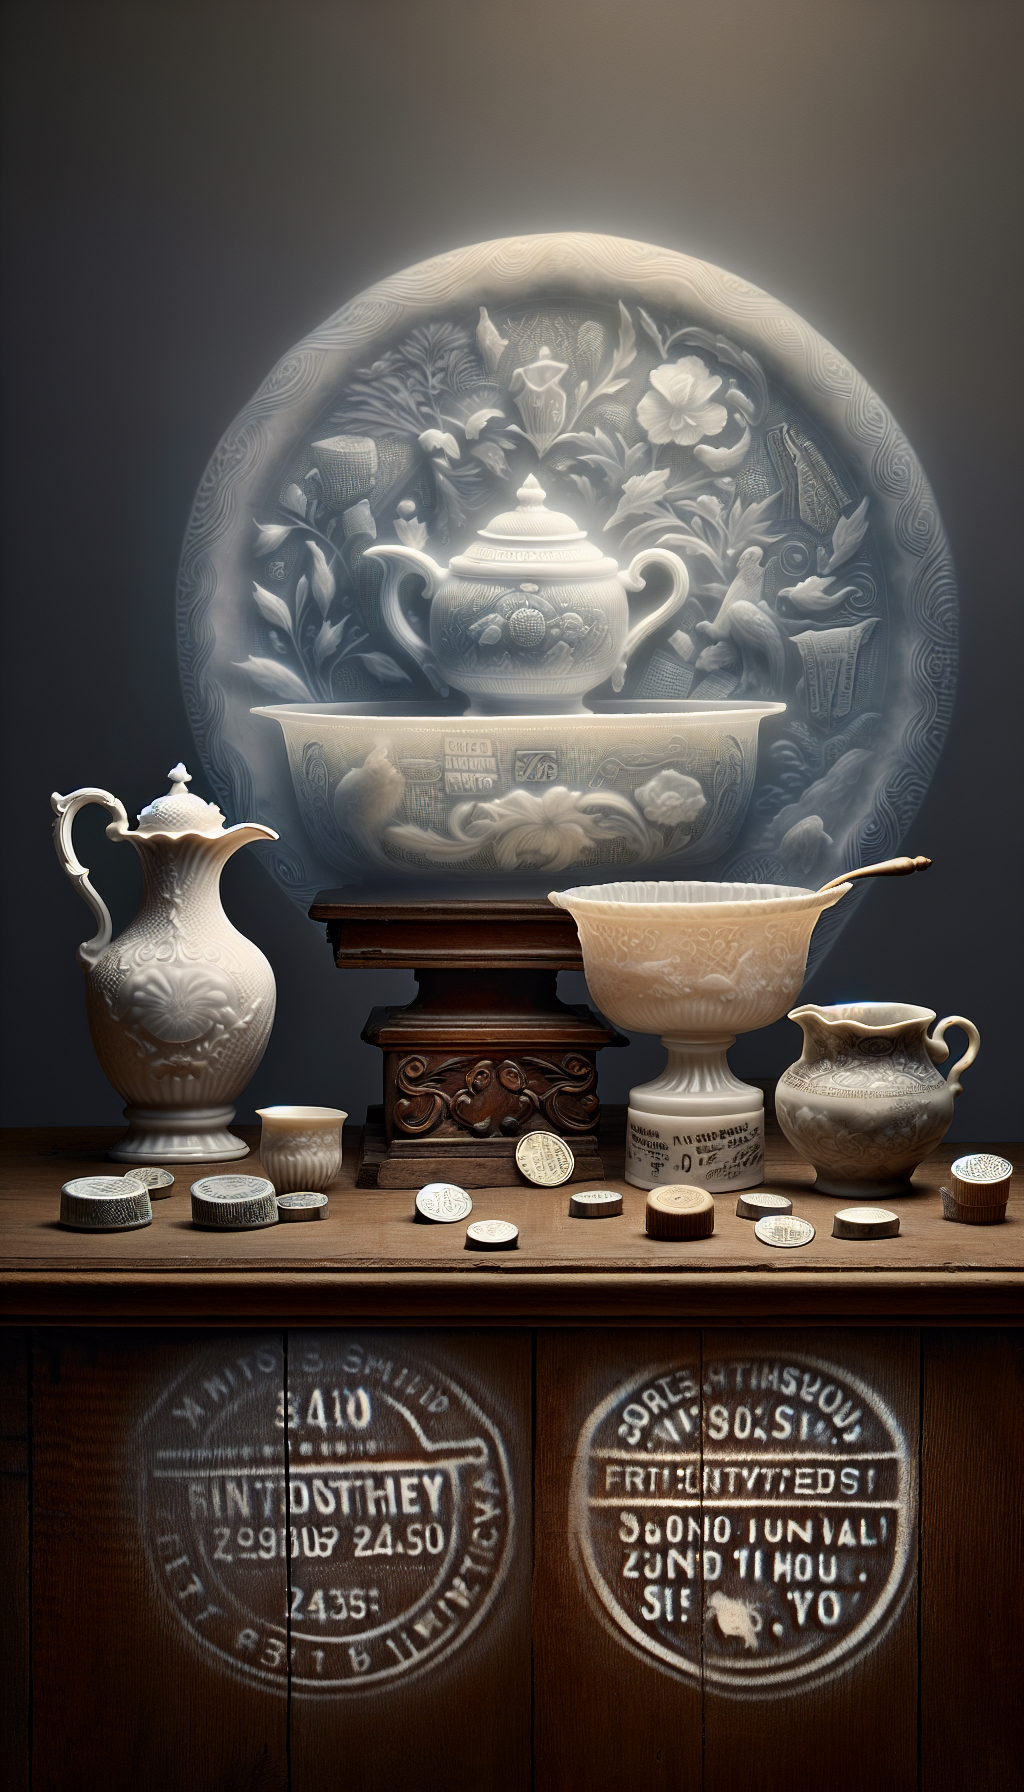 A translucent overlay of delicate porcelain patterns fades into the sturdy texture of ironstone, as a Victorian pitcher and basin rest atop an ornate wooden stand. Beneath them, ghostly imprints of hallmark stamps and maker's marks whisper their histories. The distinct contrast in materials is unified by glinting price tags, hinting at the treasure-like value of these antiques.